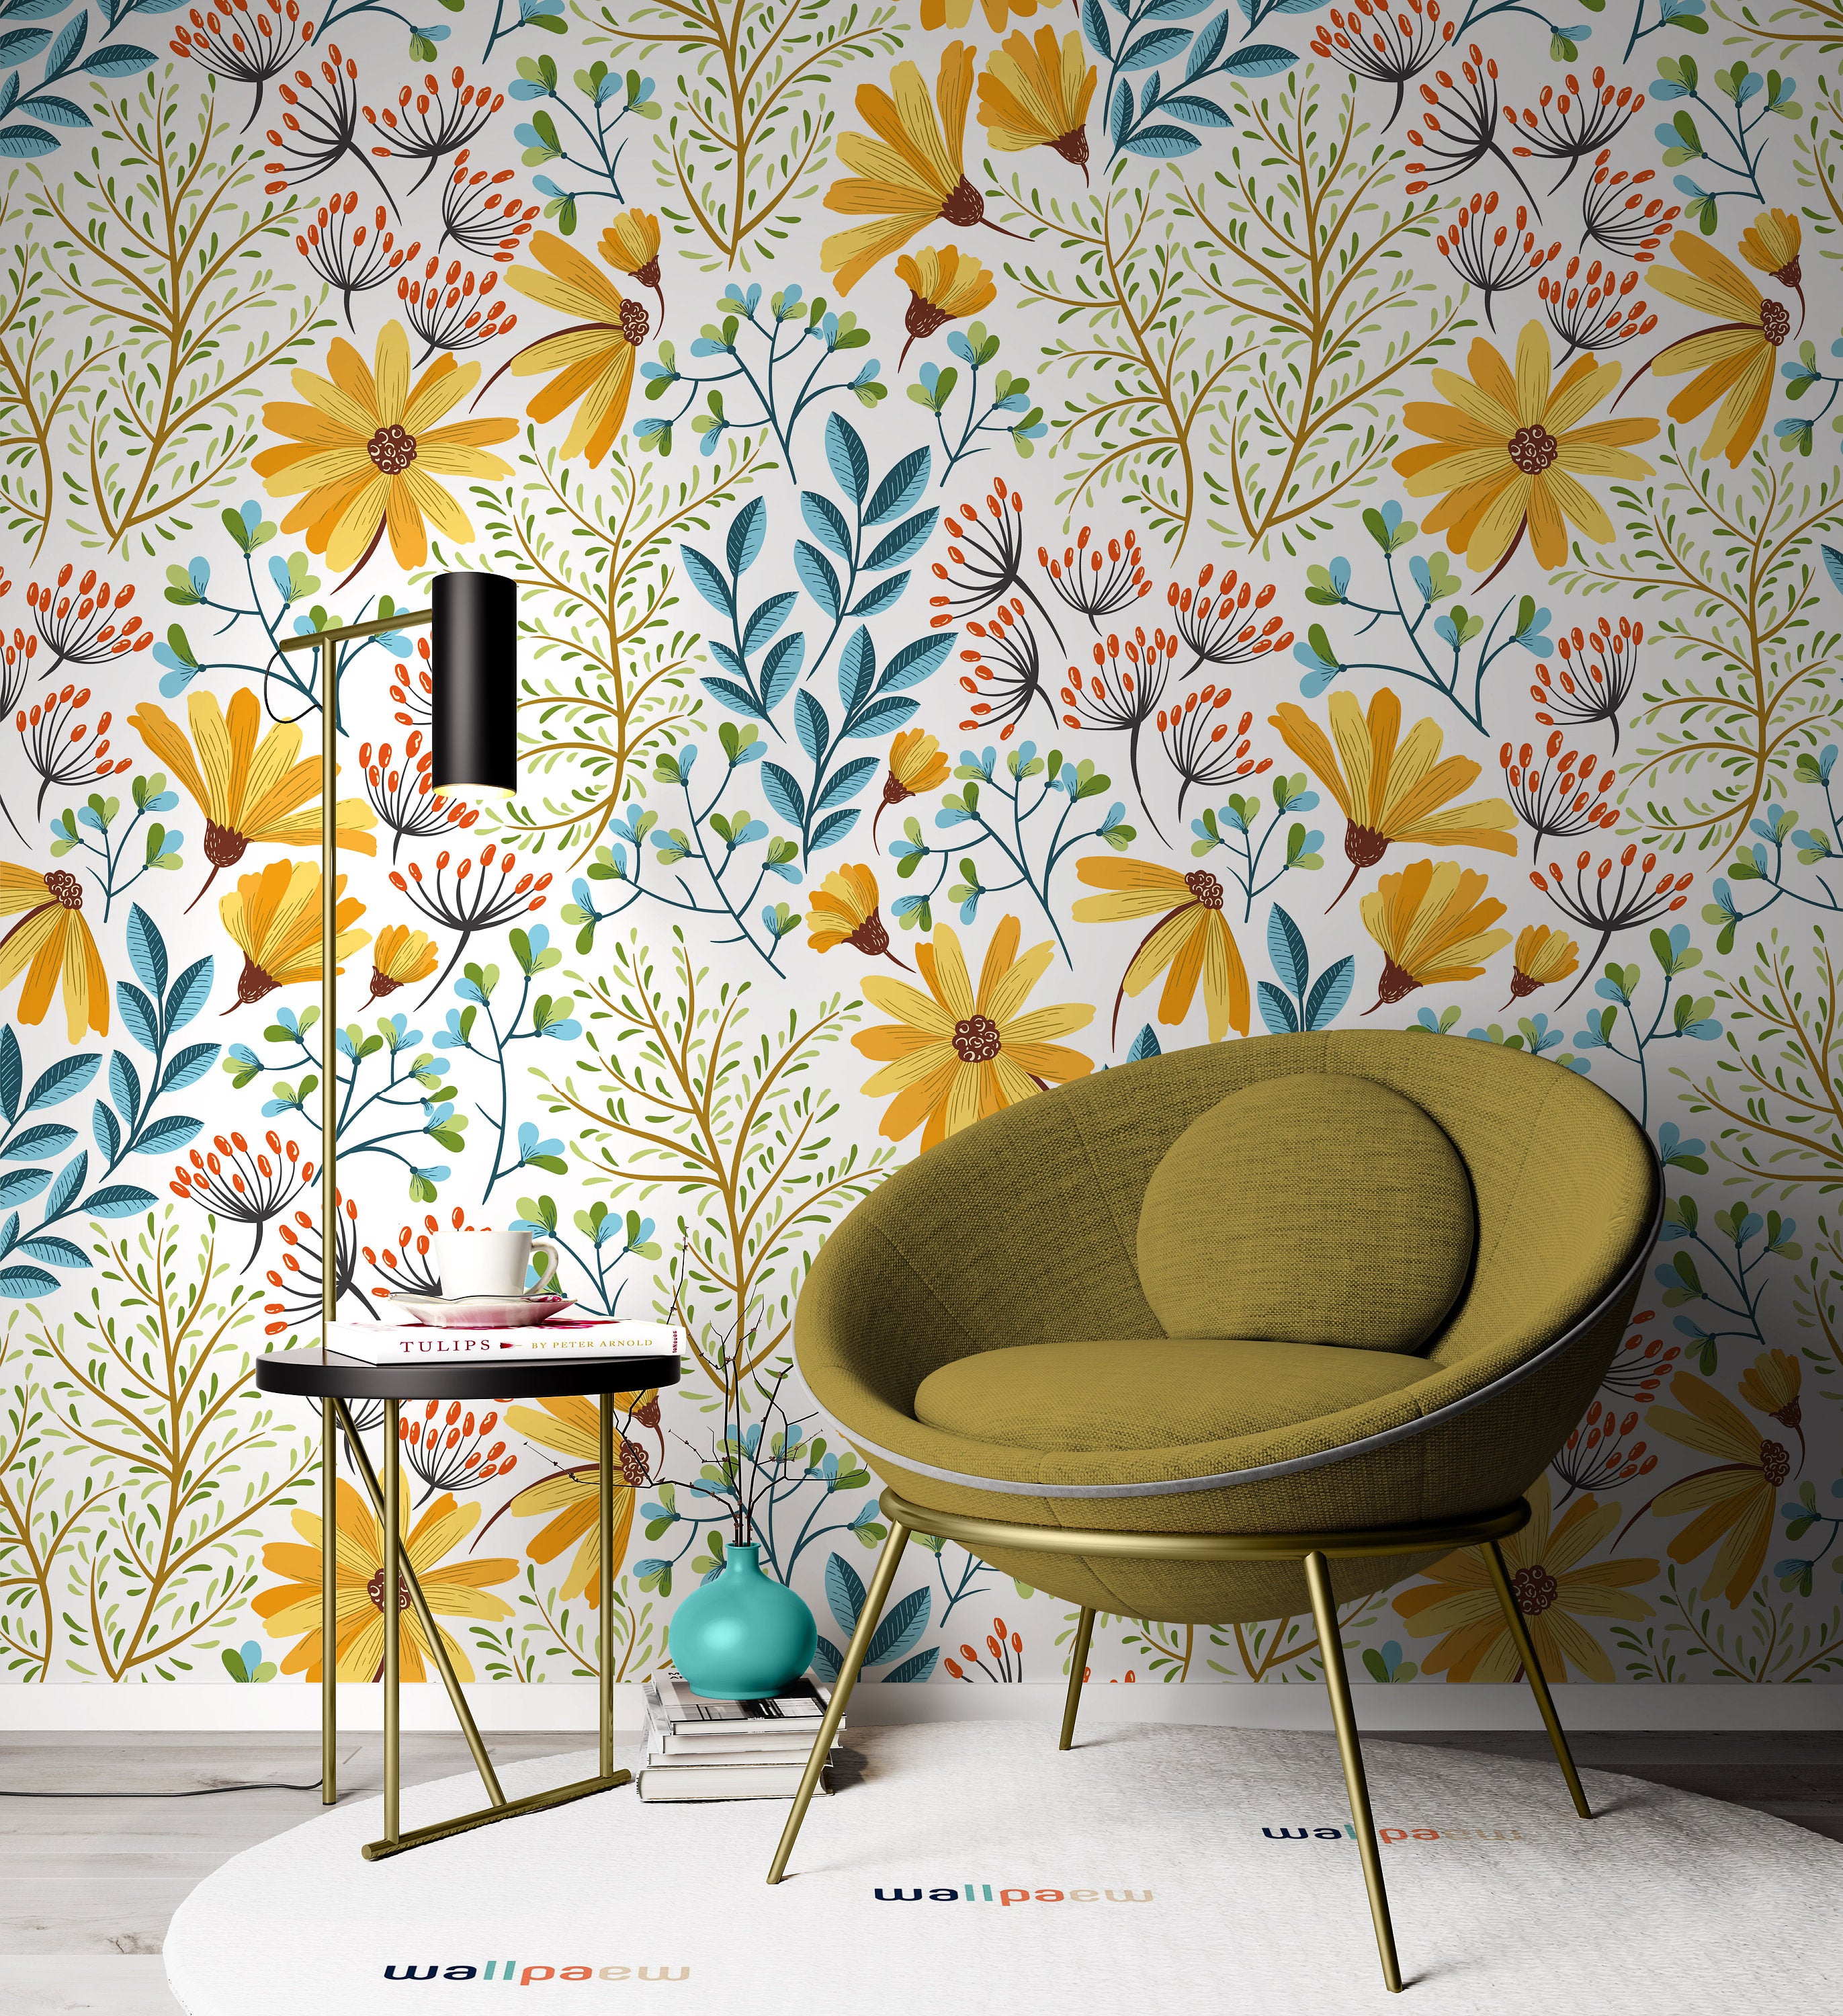 Colorful Vivid Flowers Floral Background Pattern Decorative Wallpaper Restaurant Living Room Cafe Office Bedroom Mural Home Wall Art